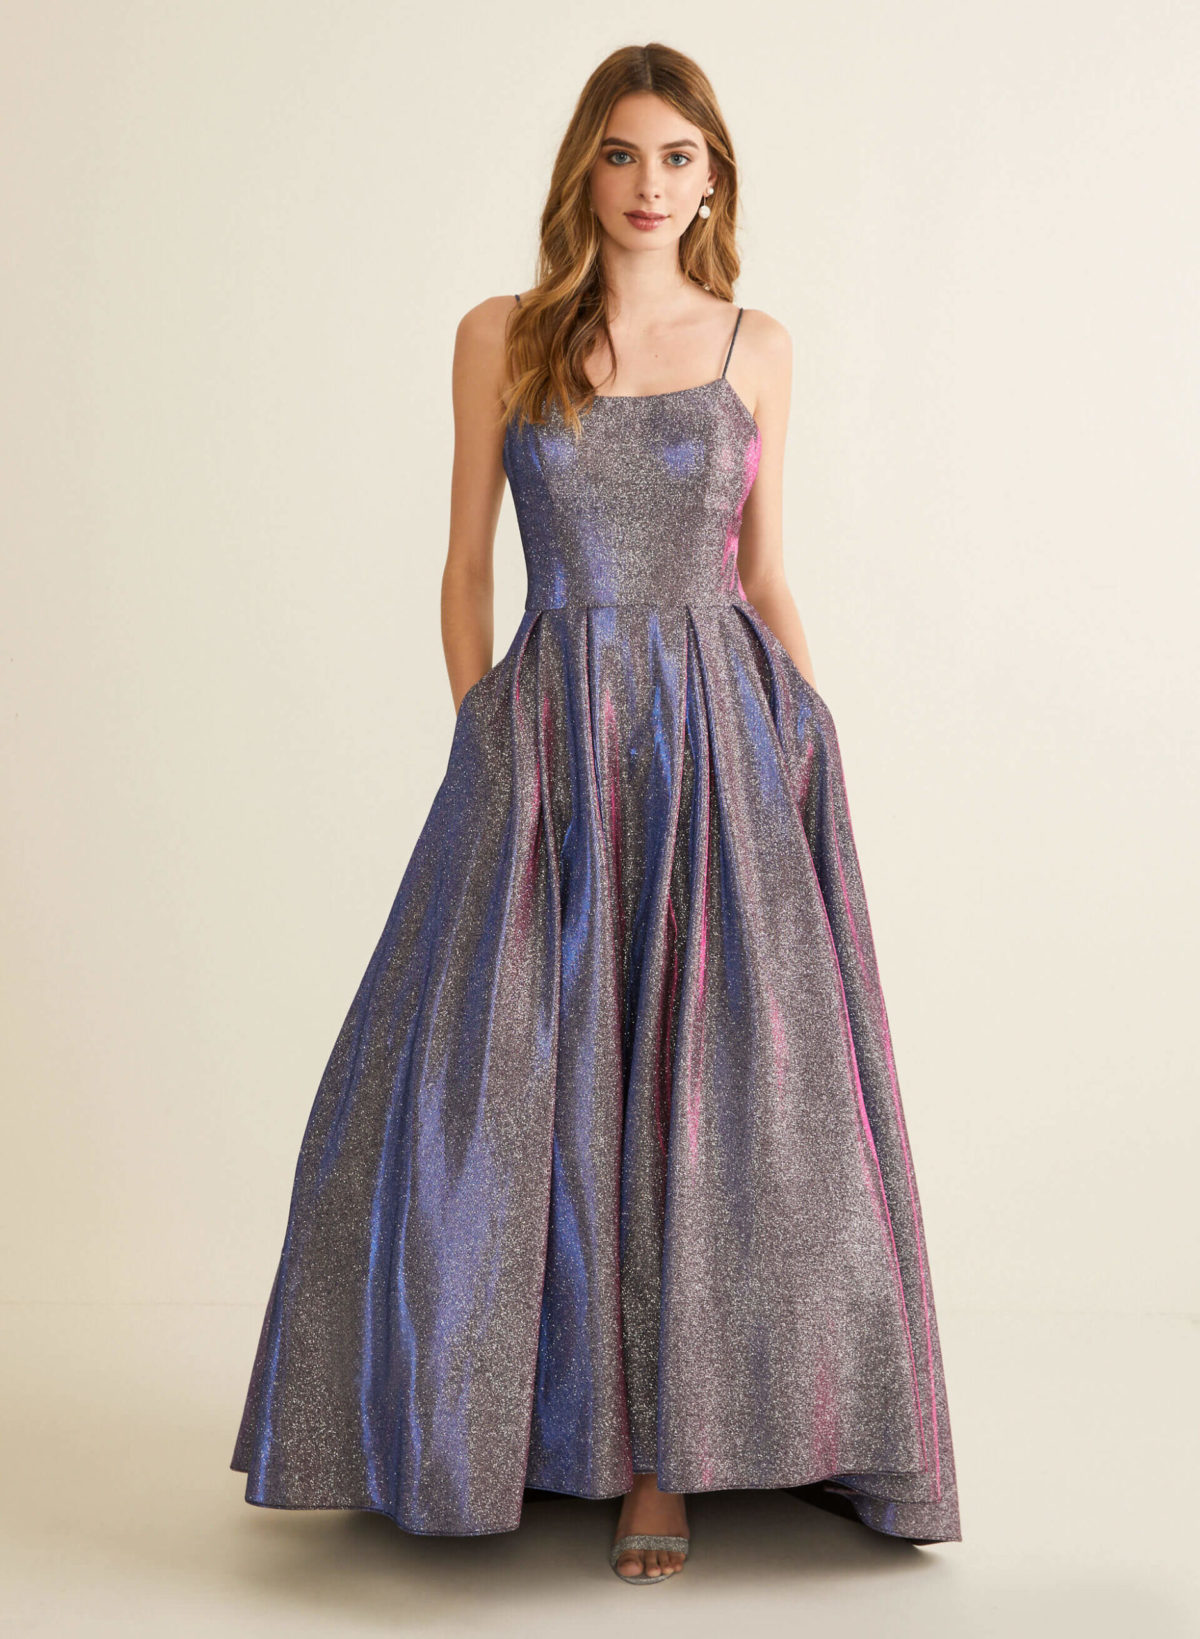 A young woman wearing a glittery metallic ball gown prom dress.